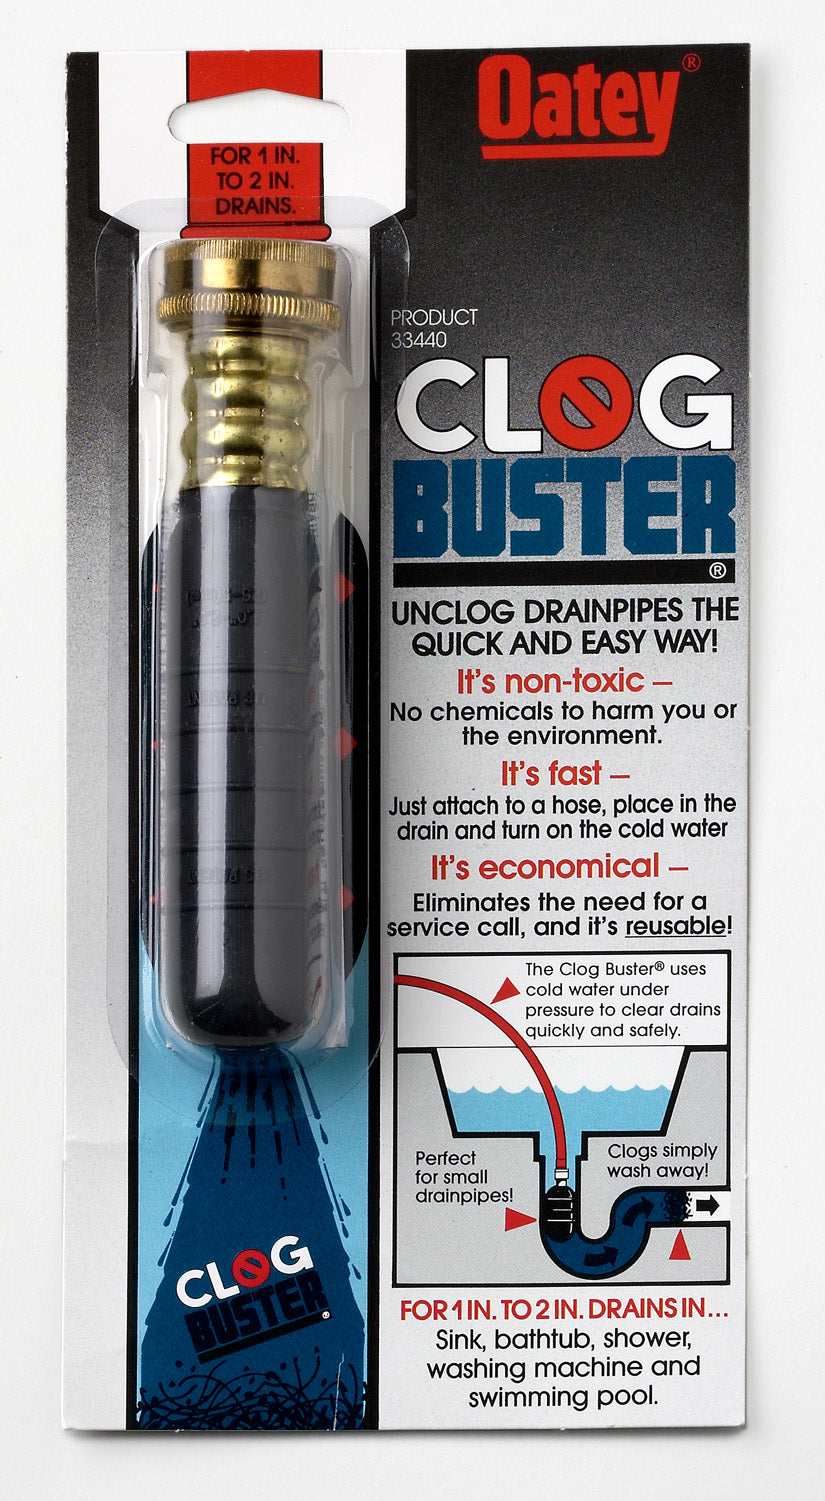 Buy clog buster - Online store for kitchen & bath, augers / openers in USA, on sale, low price, discount deals, coupon code